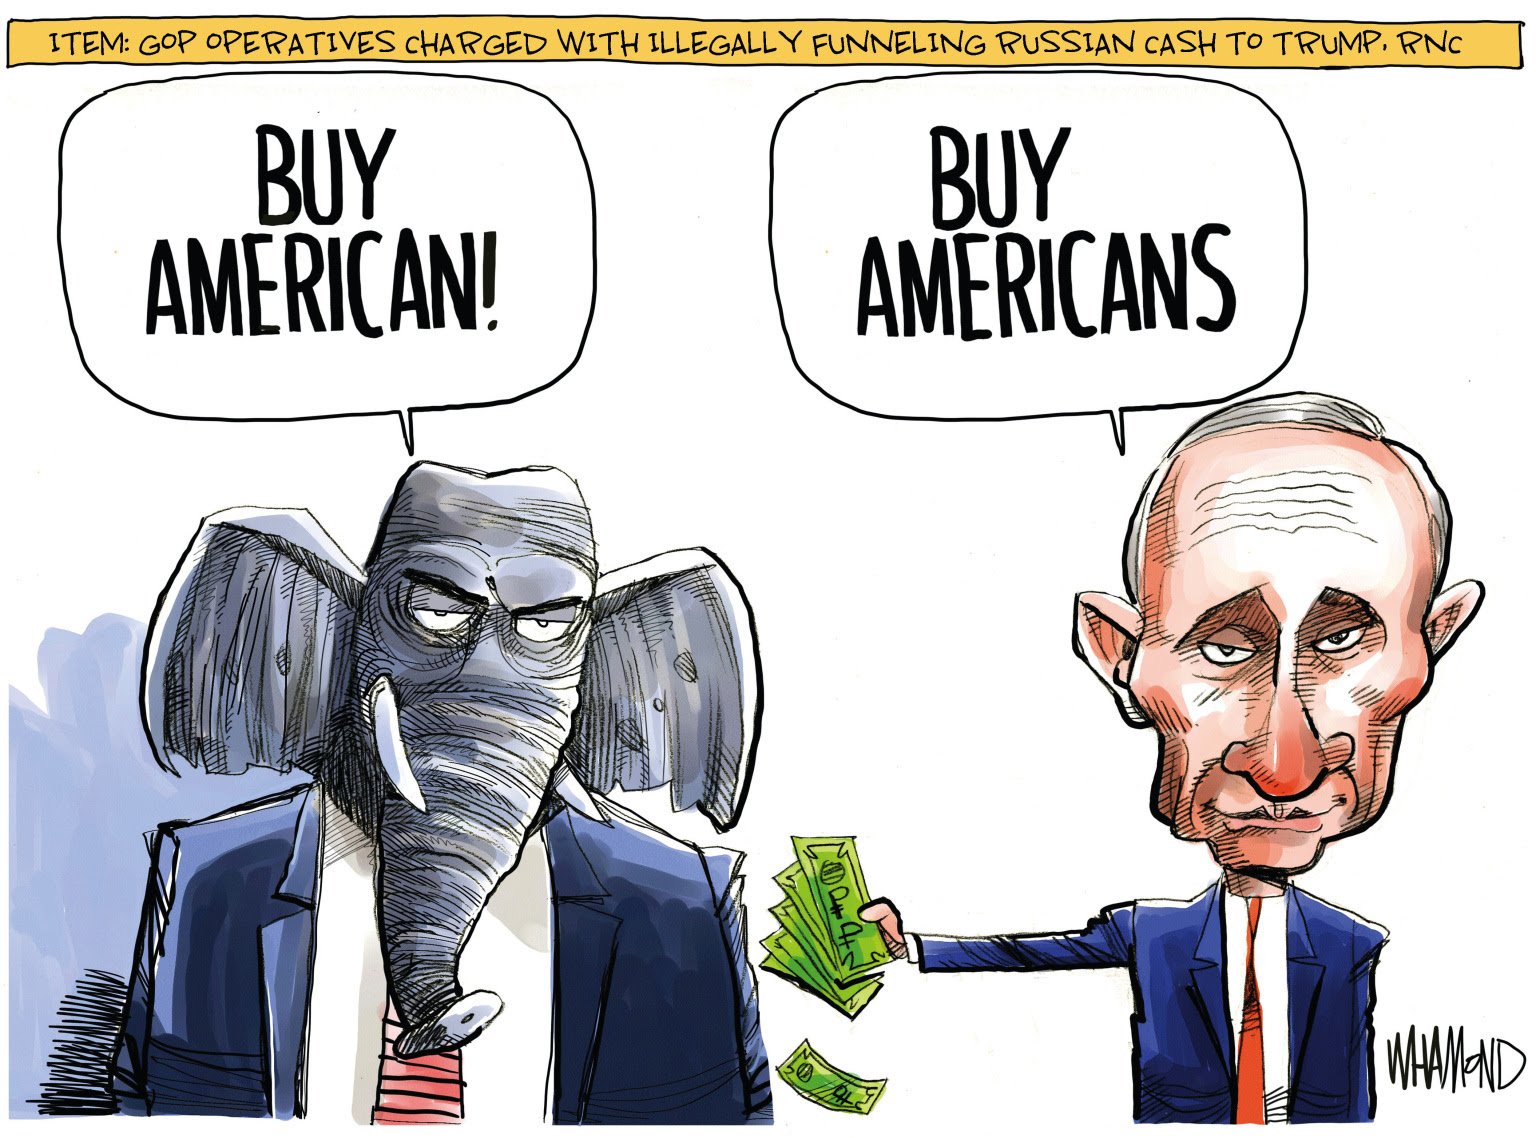 Putin influences Republican policies with donations through Russian oligarchs